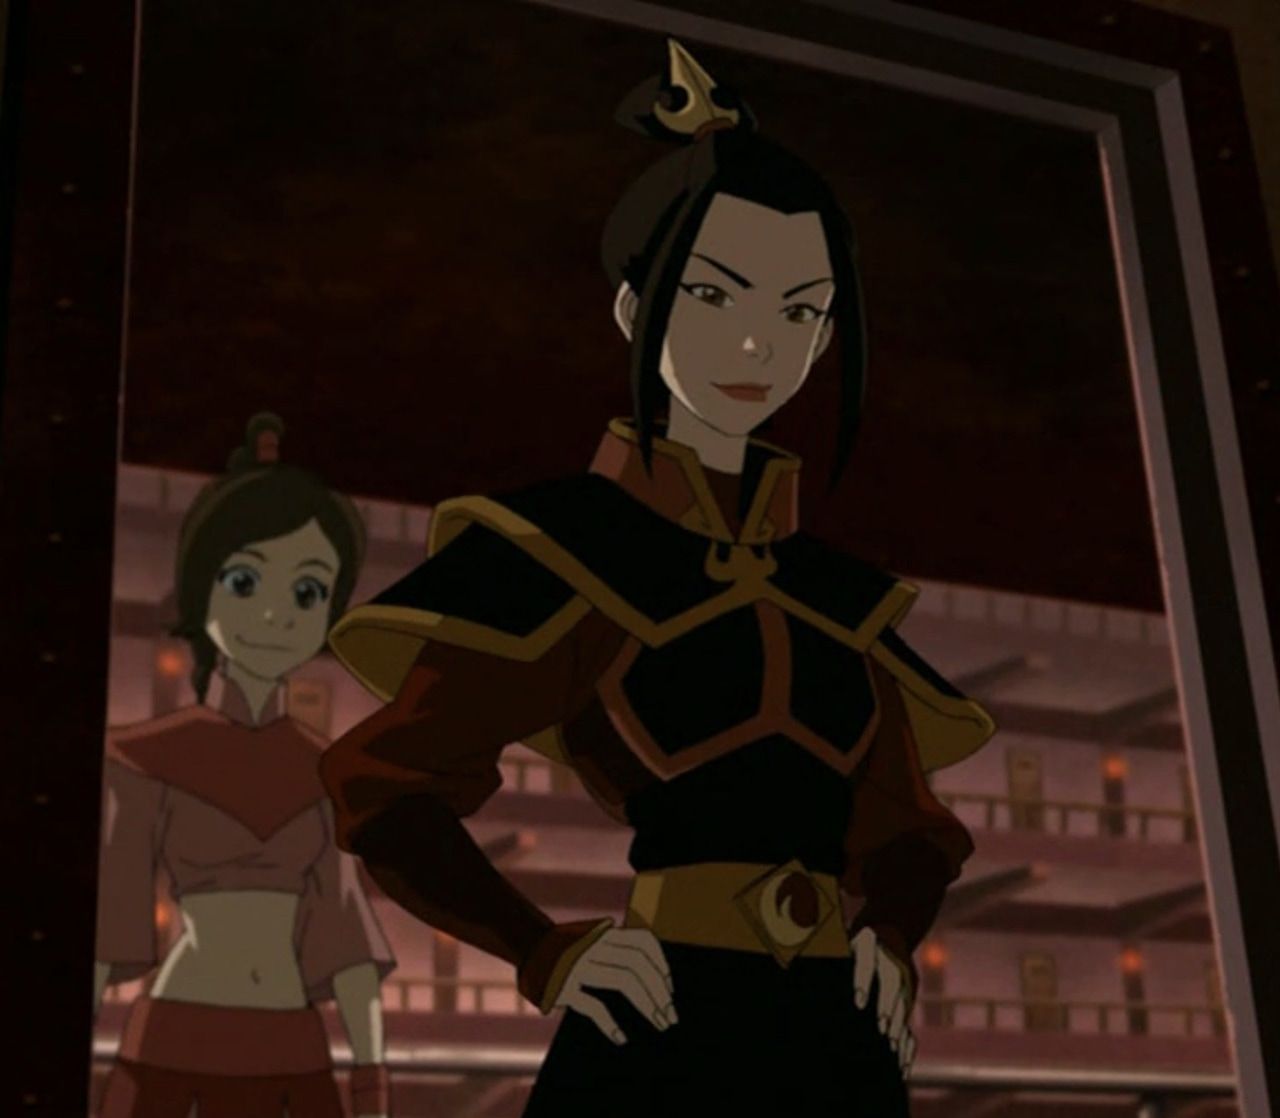 Anime, Astrology, And Elements Image The Last Airbender Azula Hair